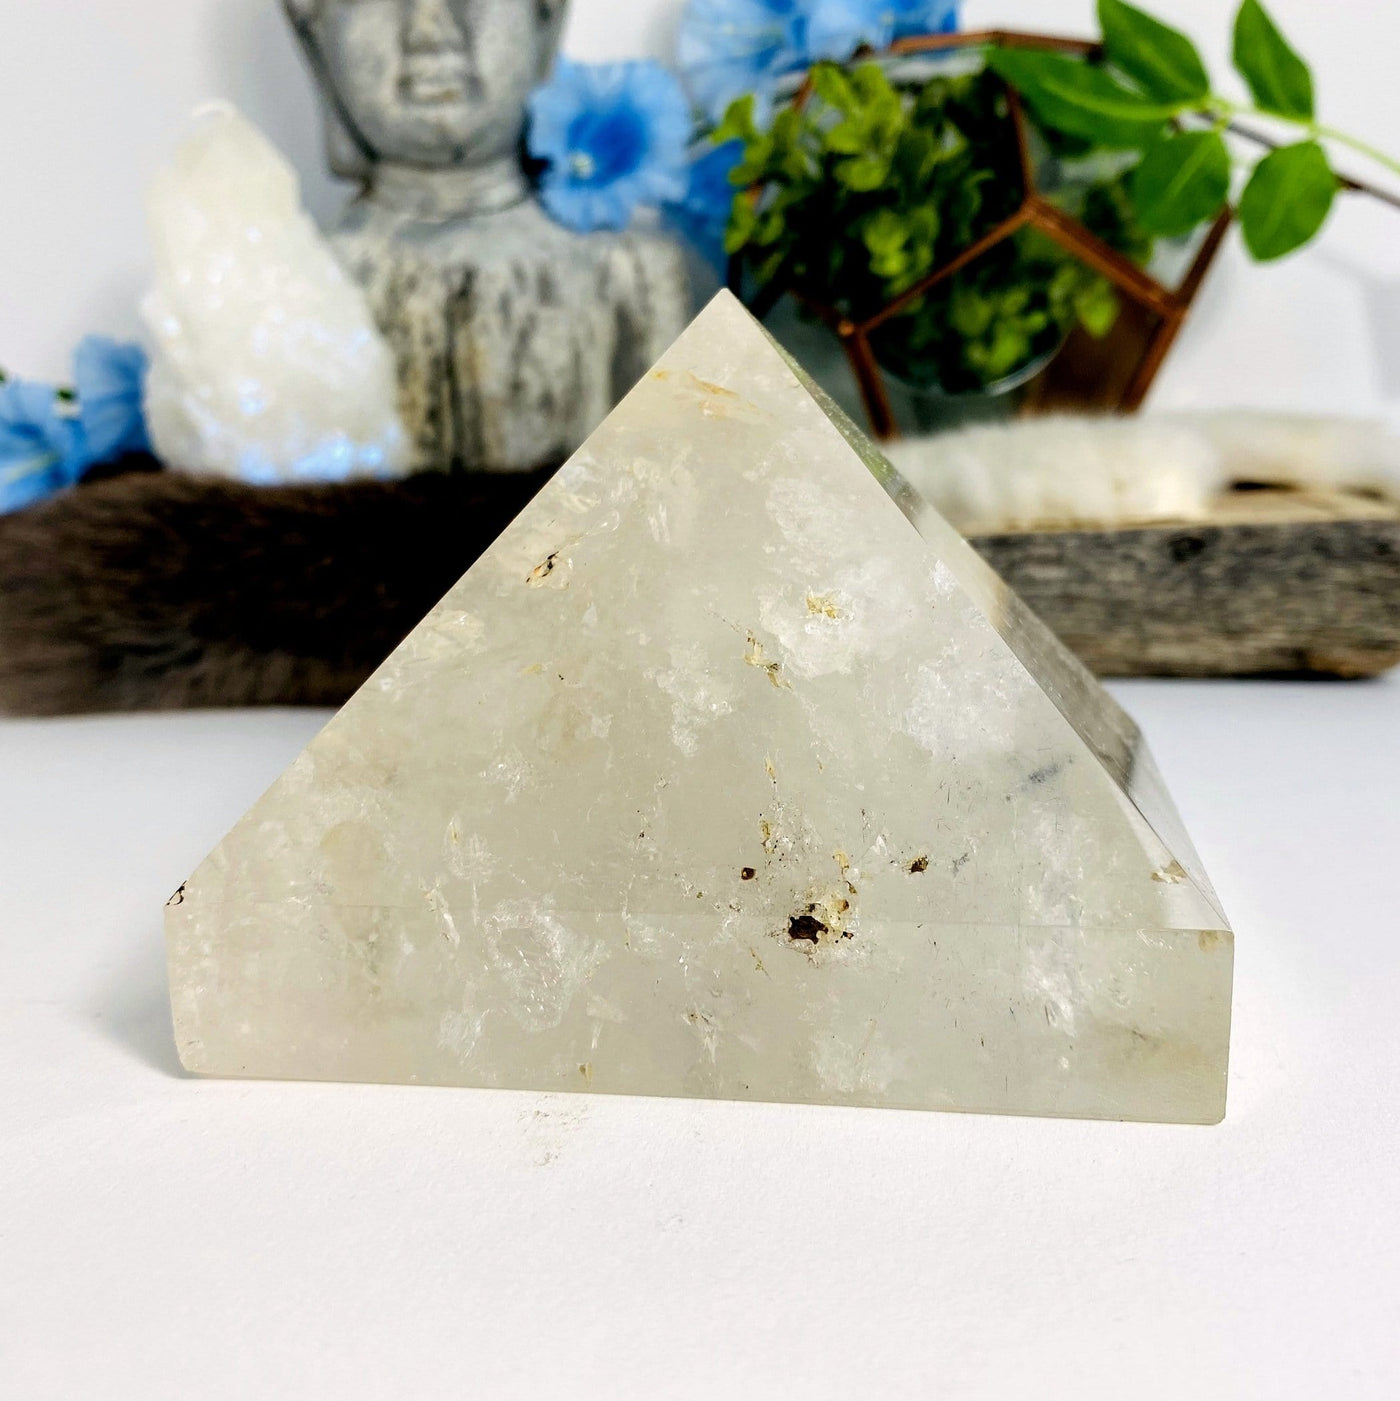 Crystal Quartz Pyramid with decorations in the background